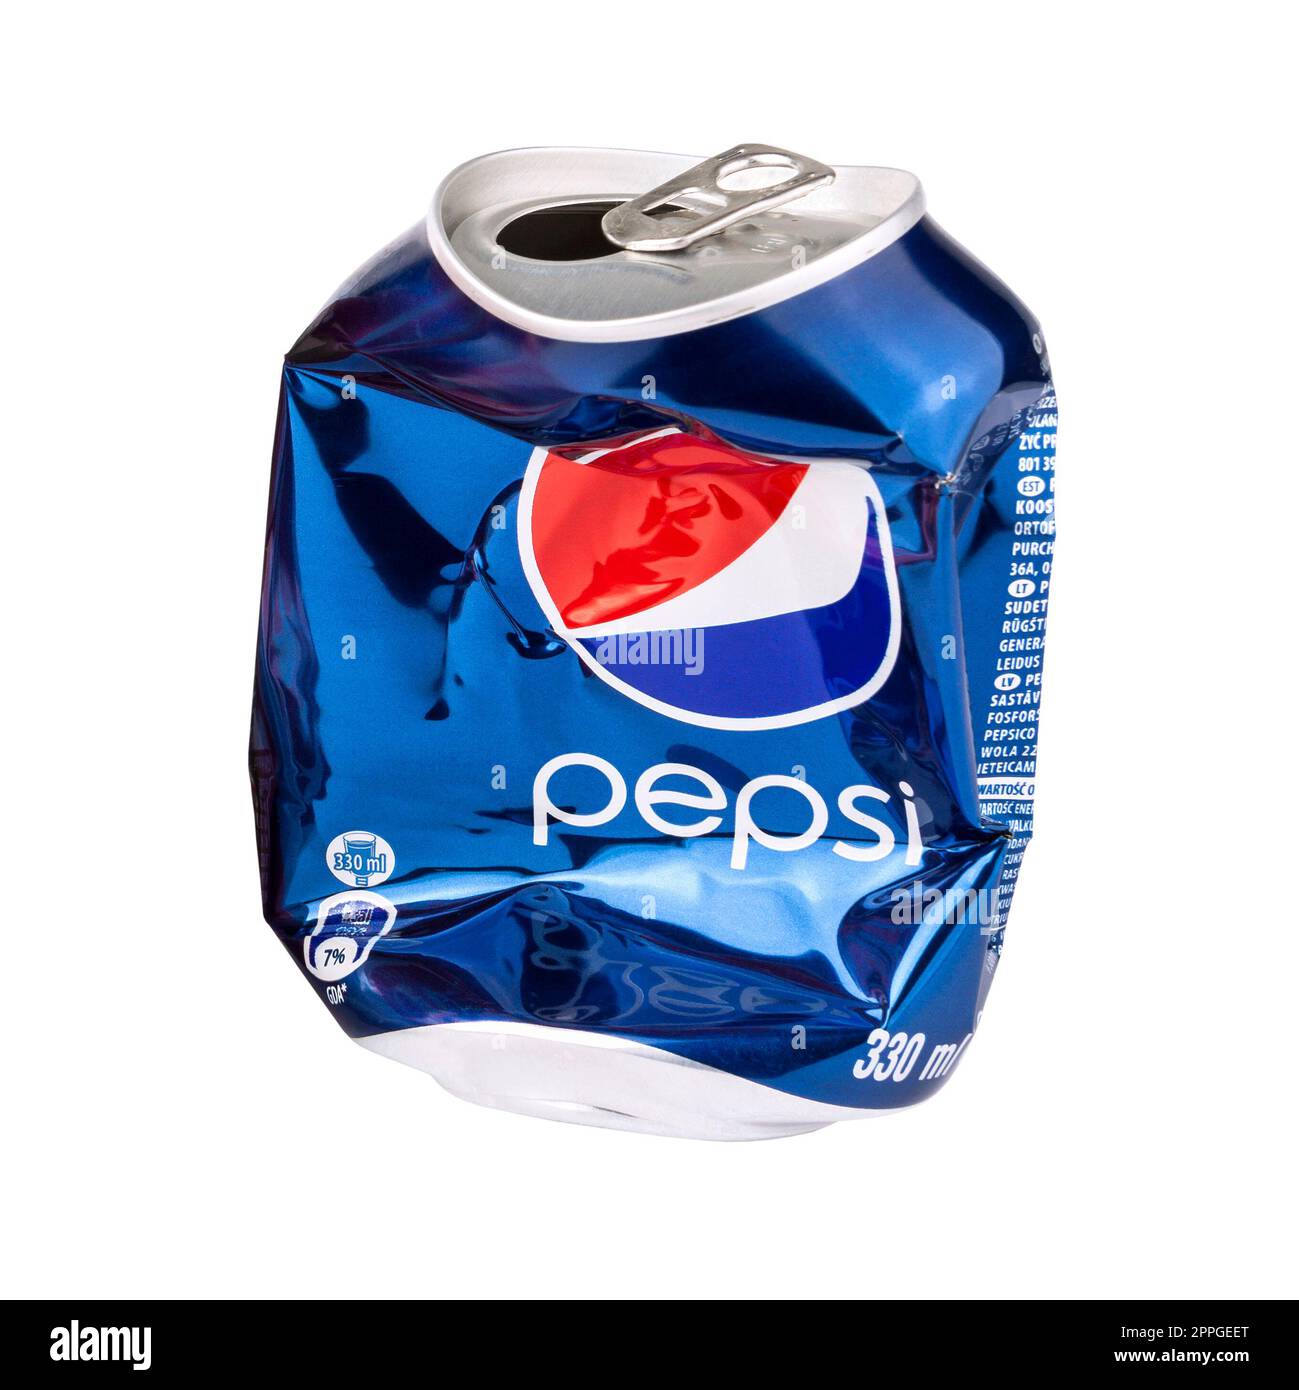 Soda can crushed Cut Out Stock Images & Pictures - Alamy